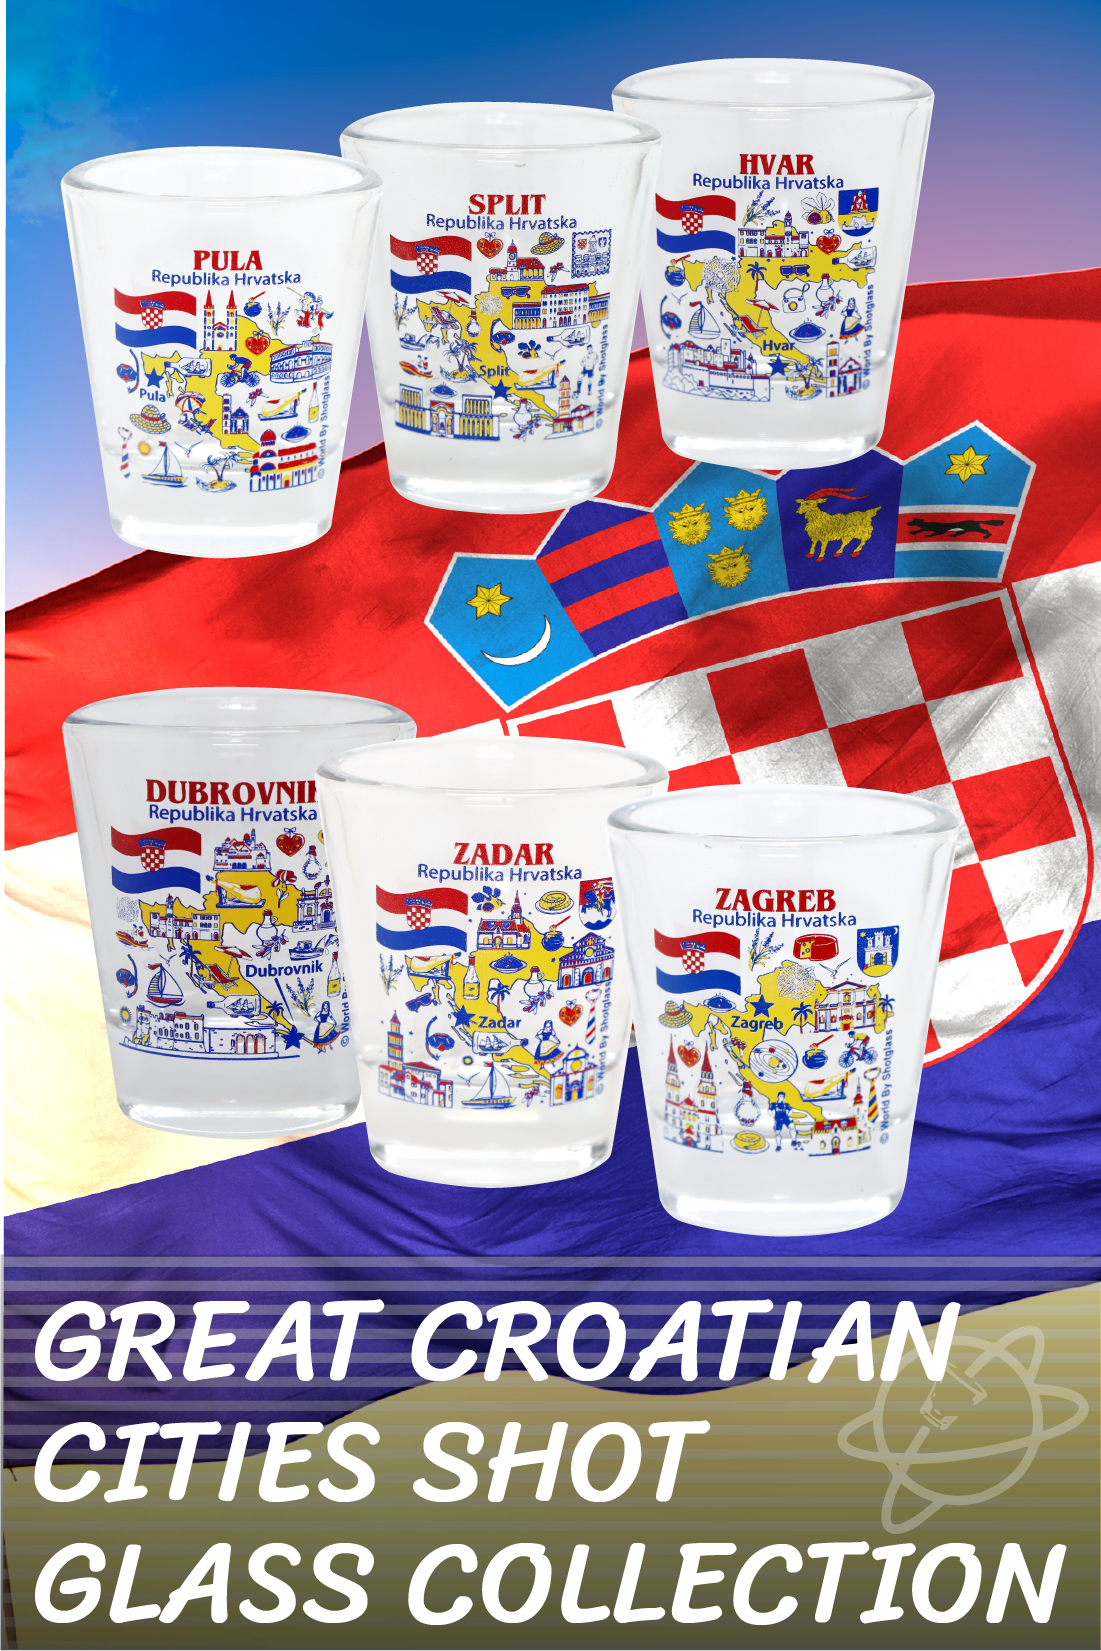 Great Croatian Cities Shot Glass Collection